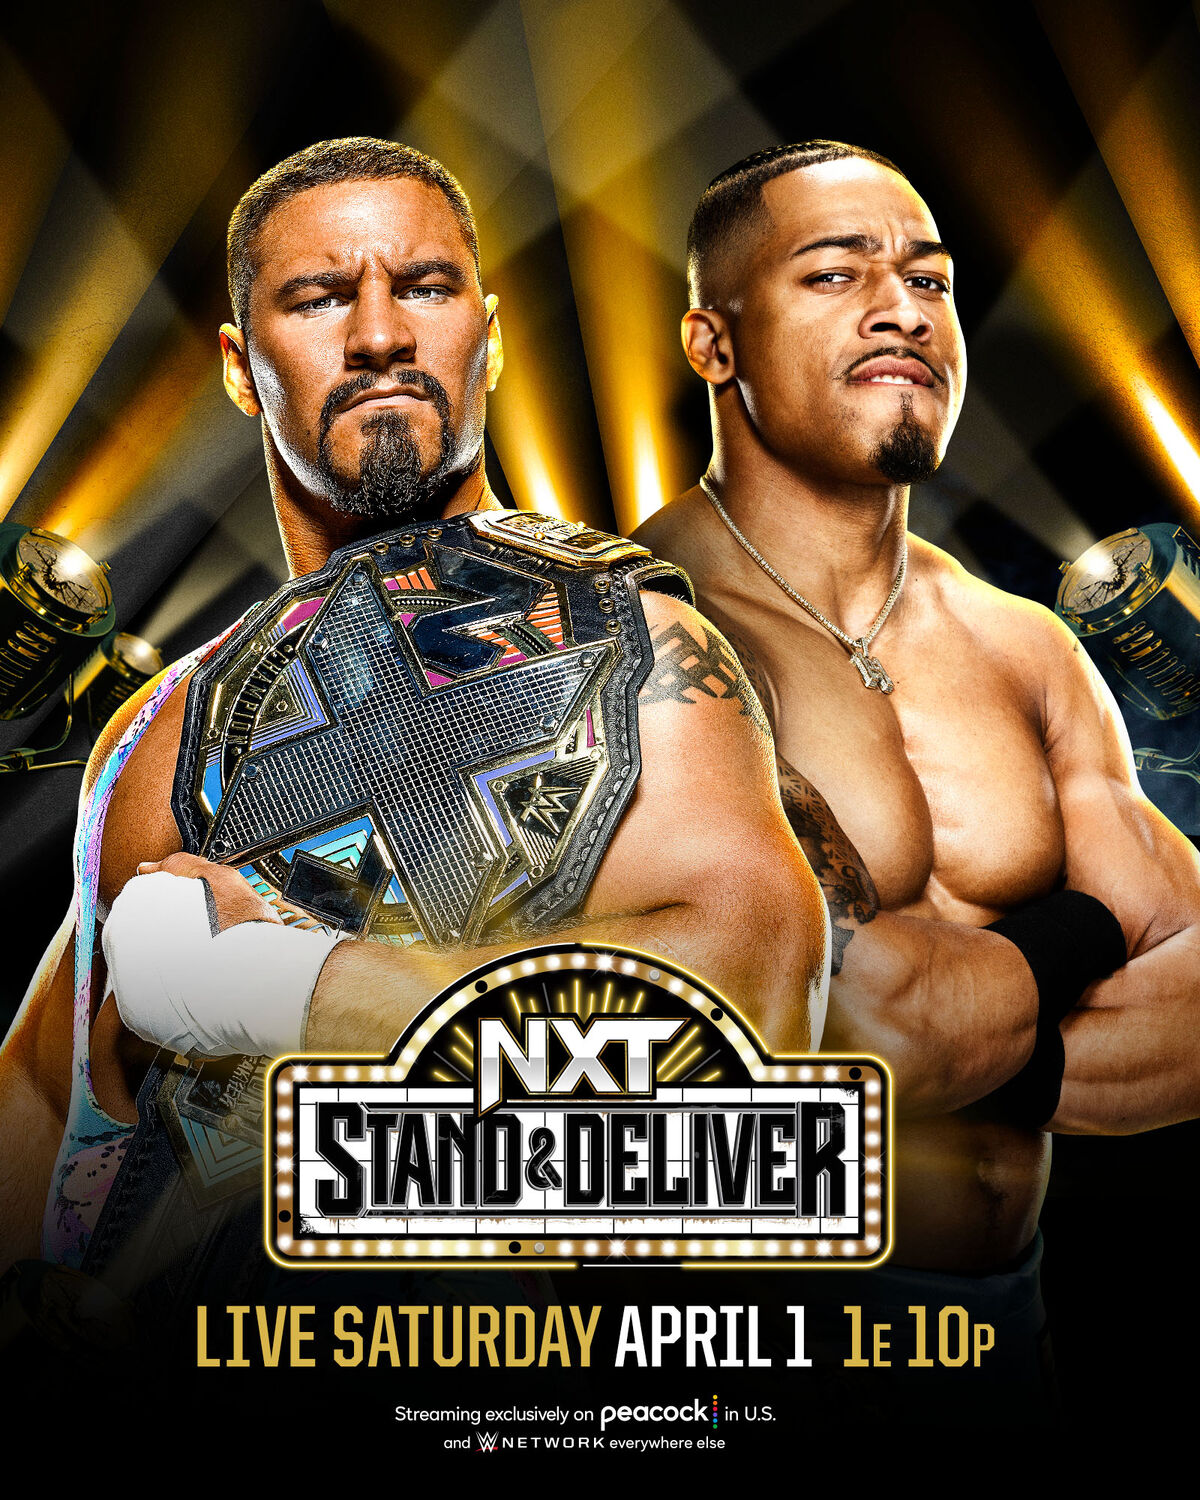 Category2023 NXT payperview events Pro Wrestling Fandom